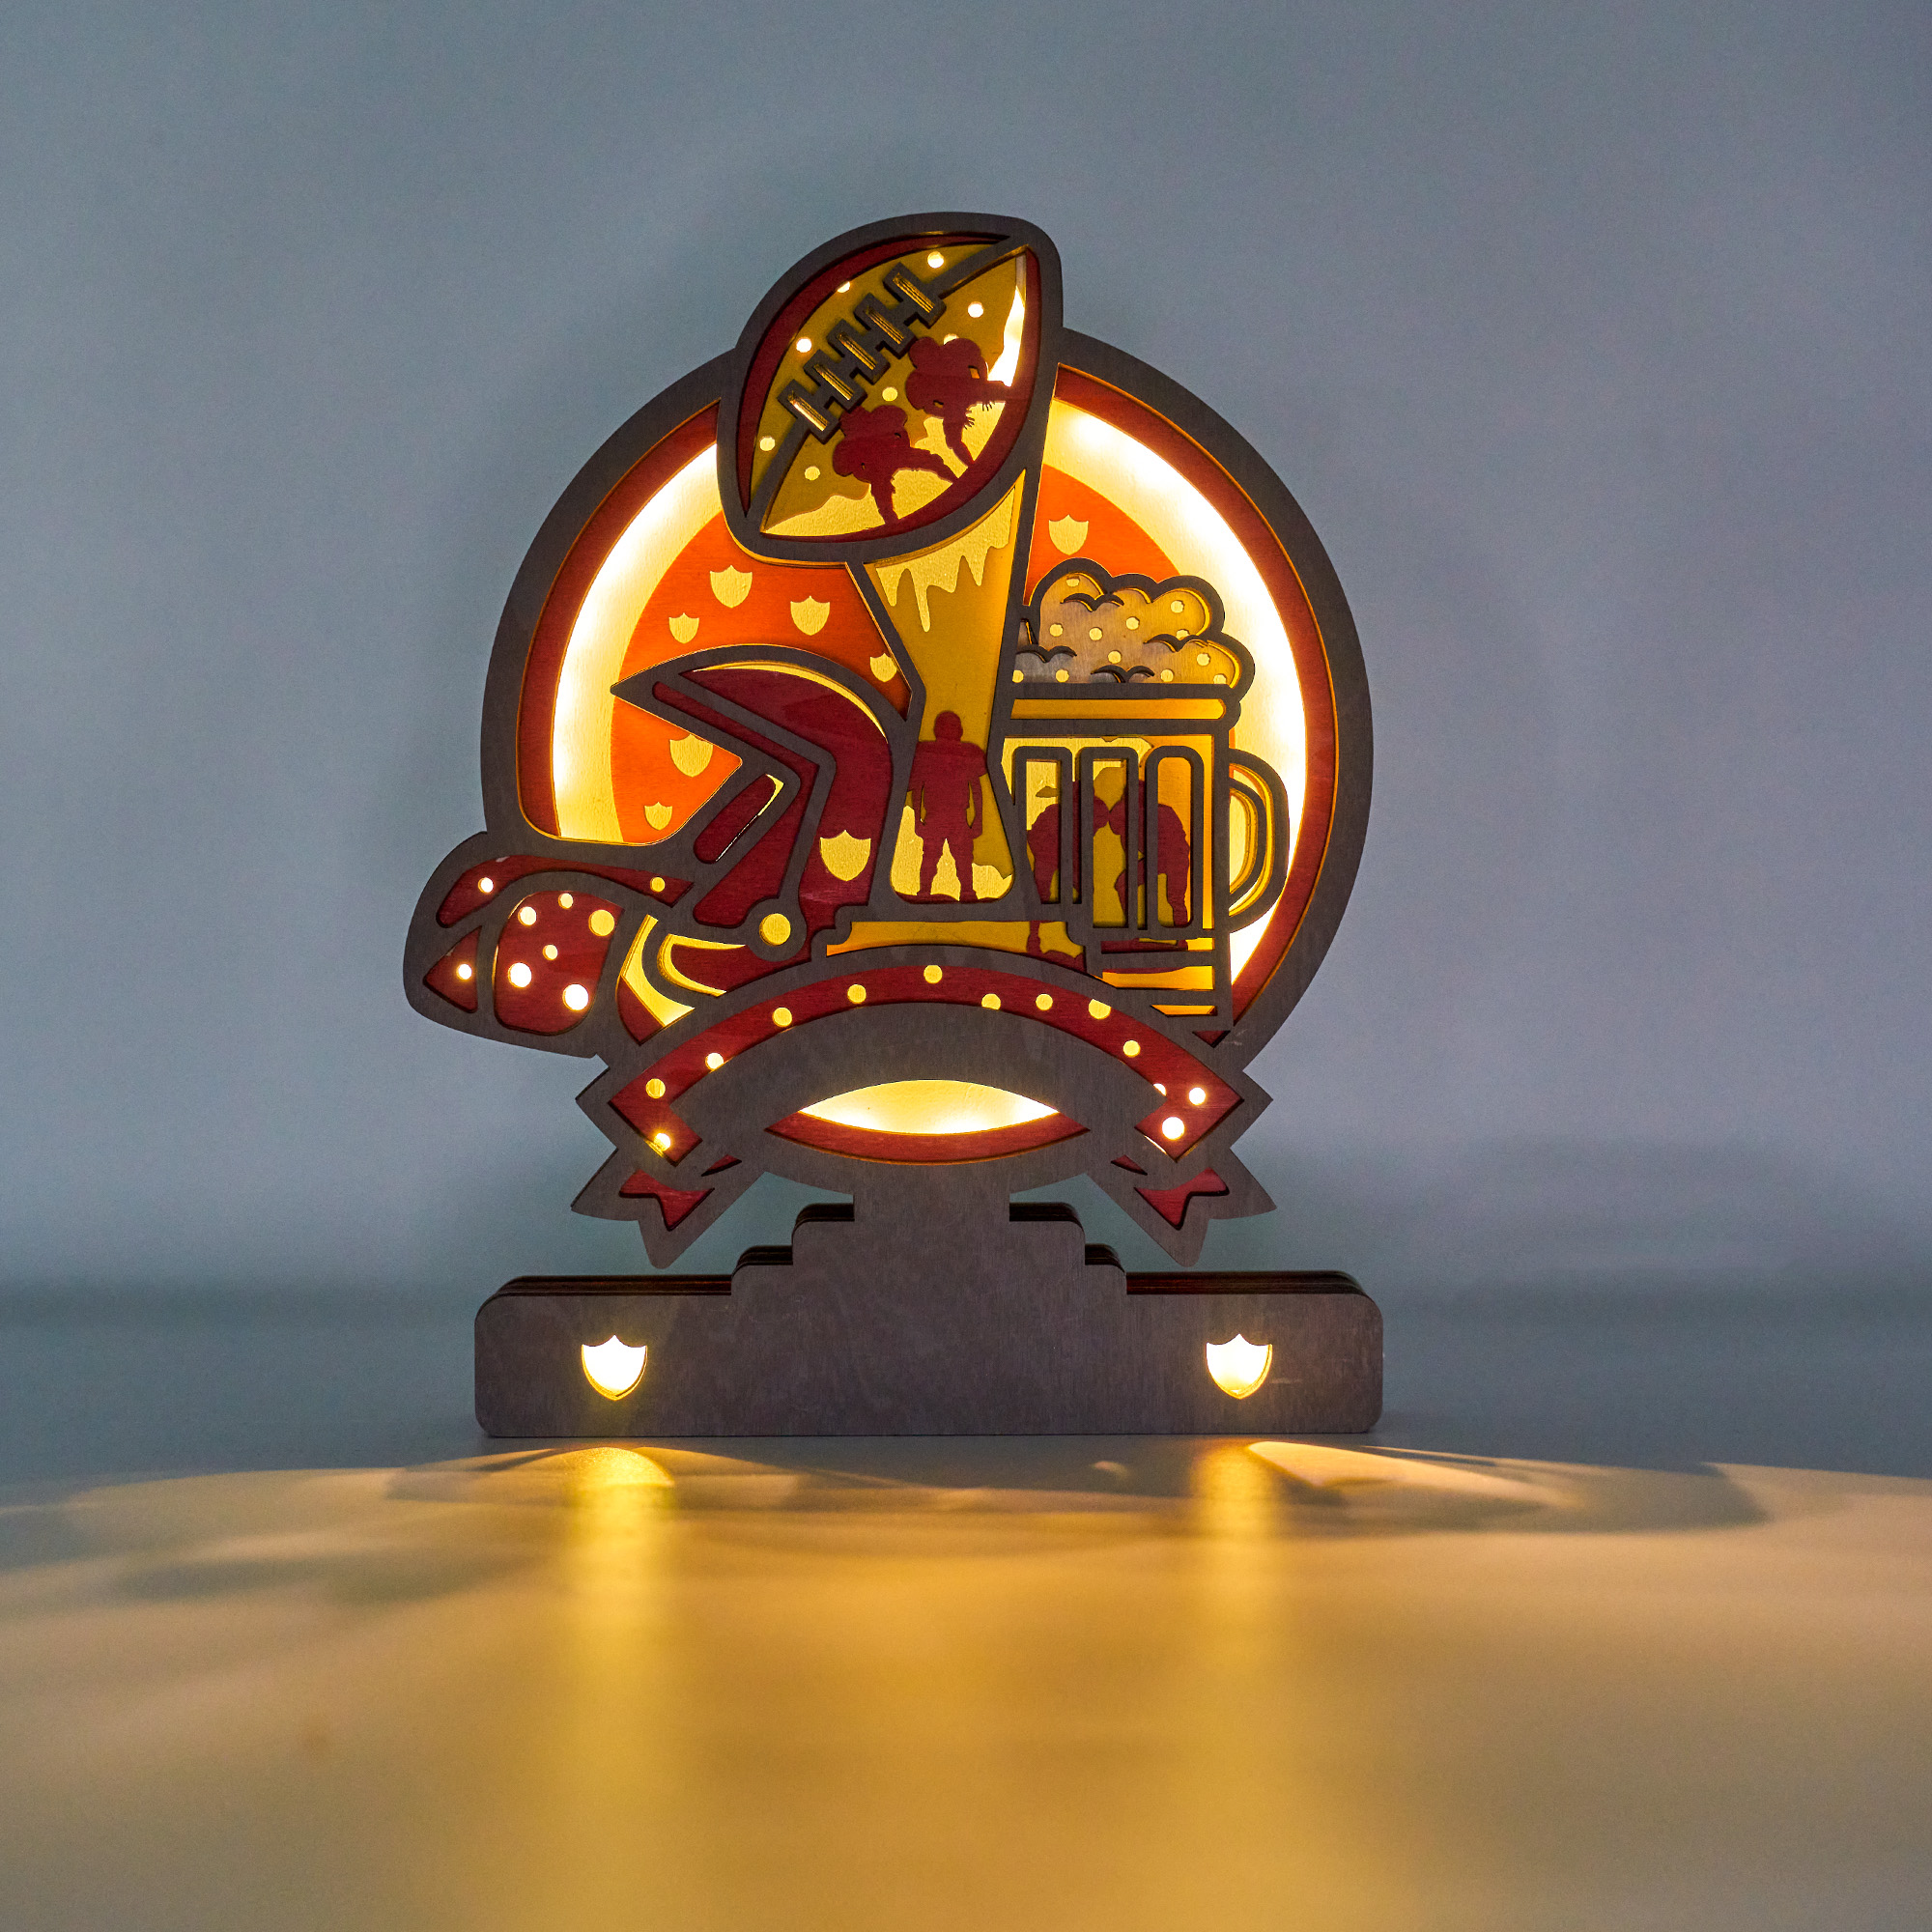 Super Bowl-A 3D Wooden Carving,Suitable for Home Decoration,Holiday Gift,Art Night Light